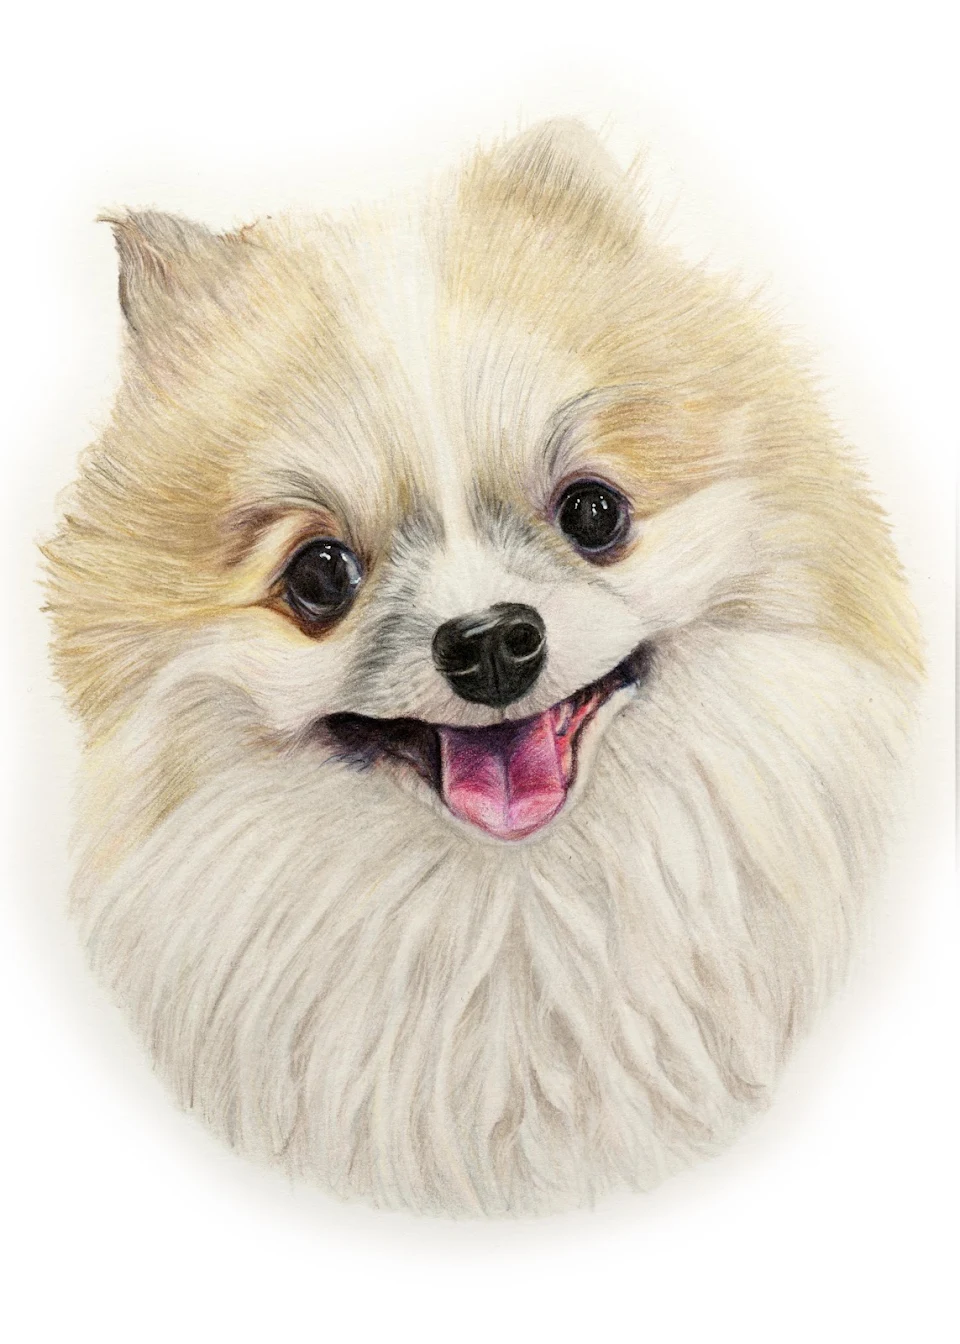 Sharing a colored pencil drawing of Haley, 2/9 Pomeranians we did for a client 😊